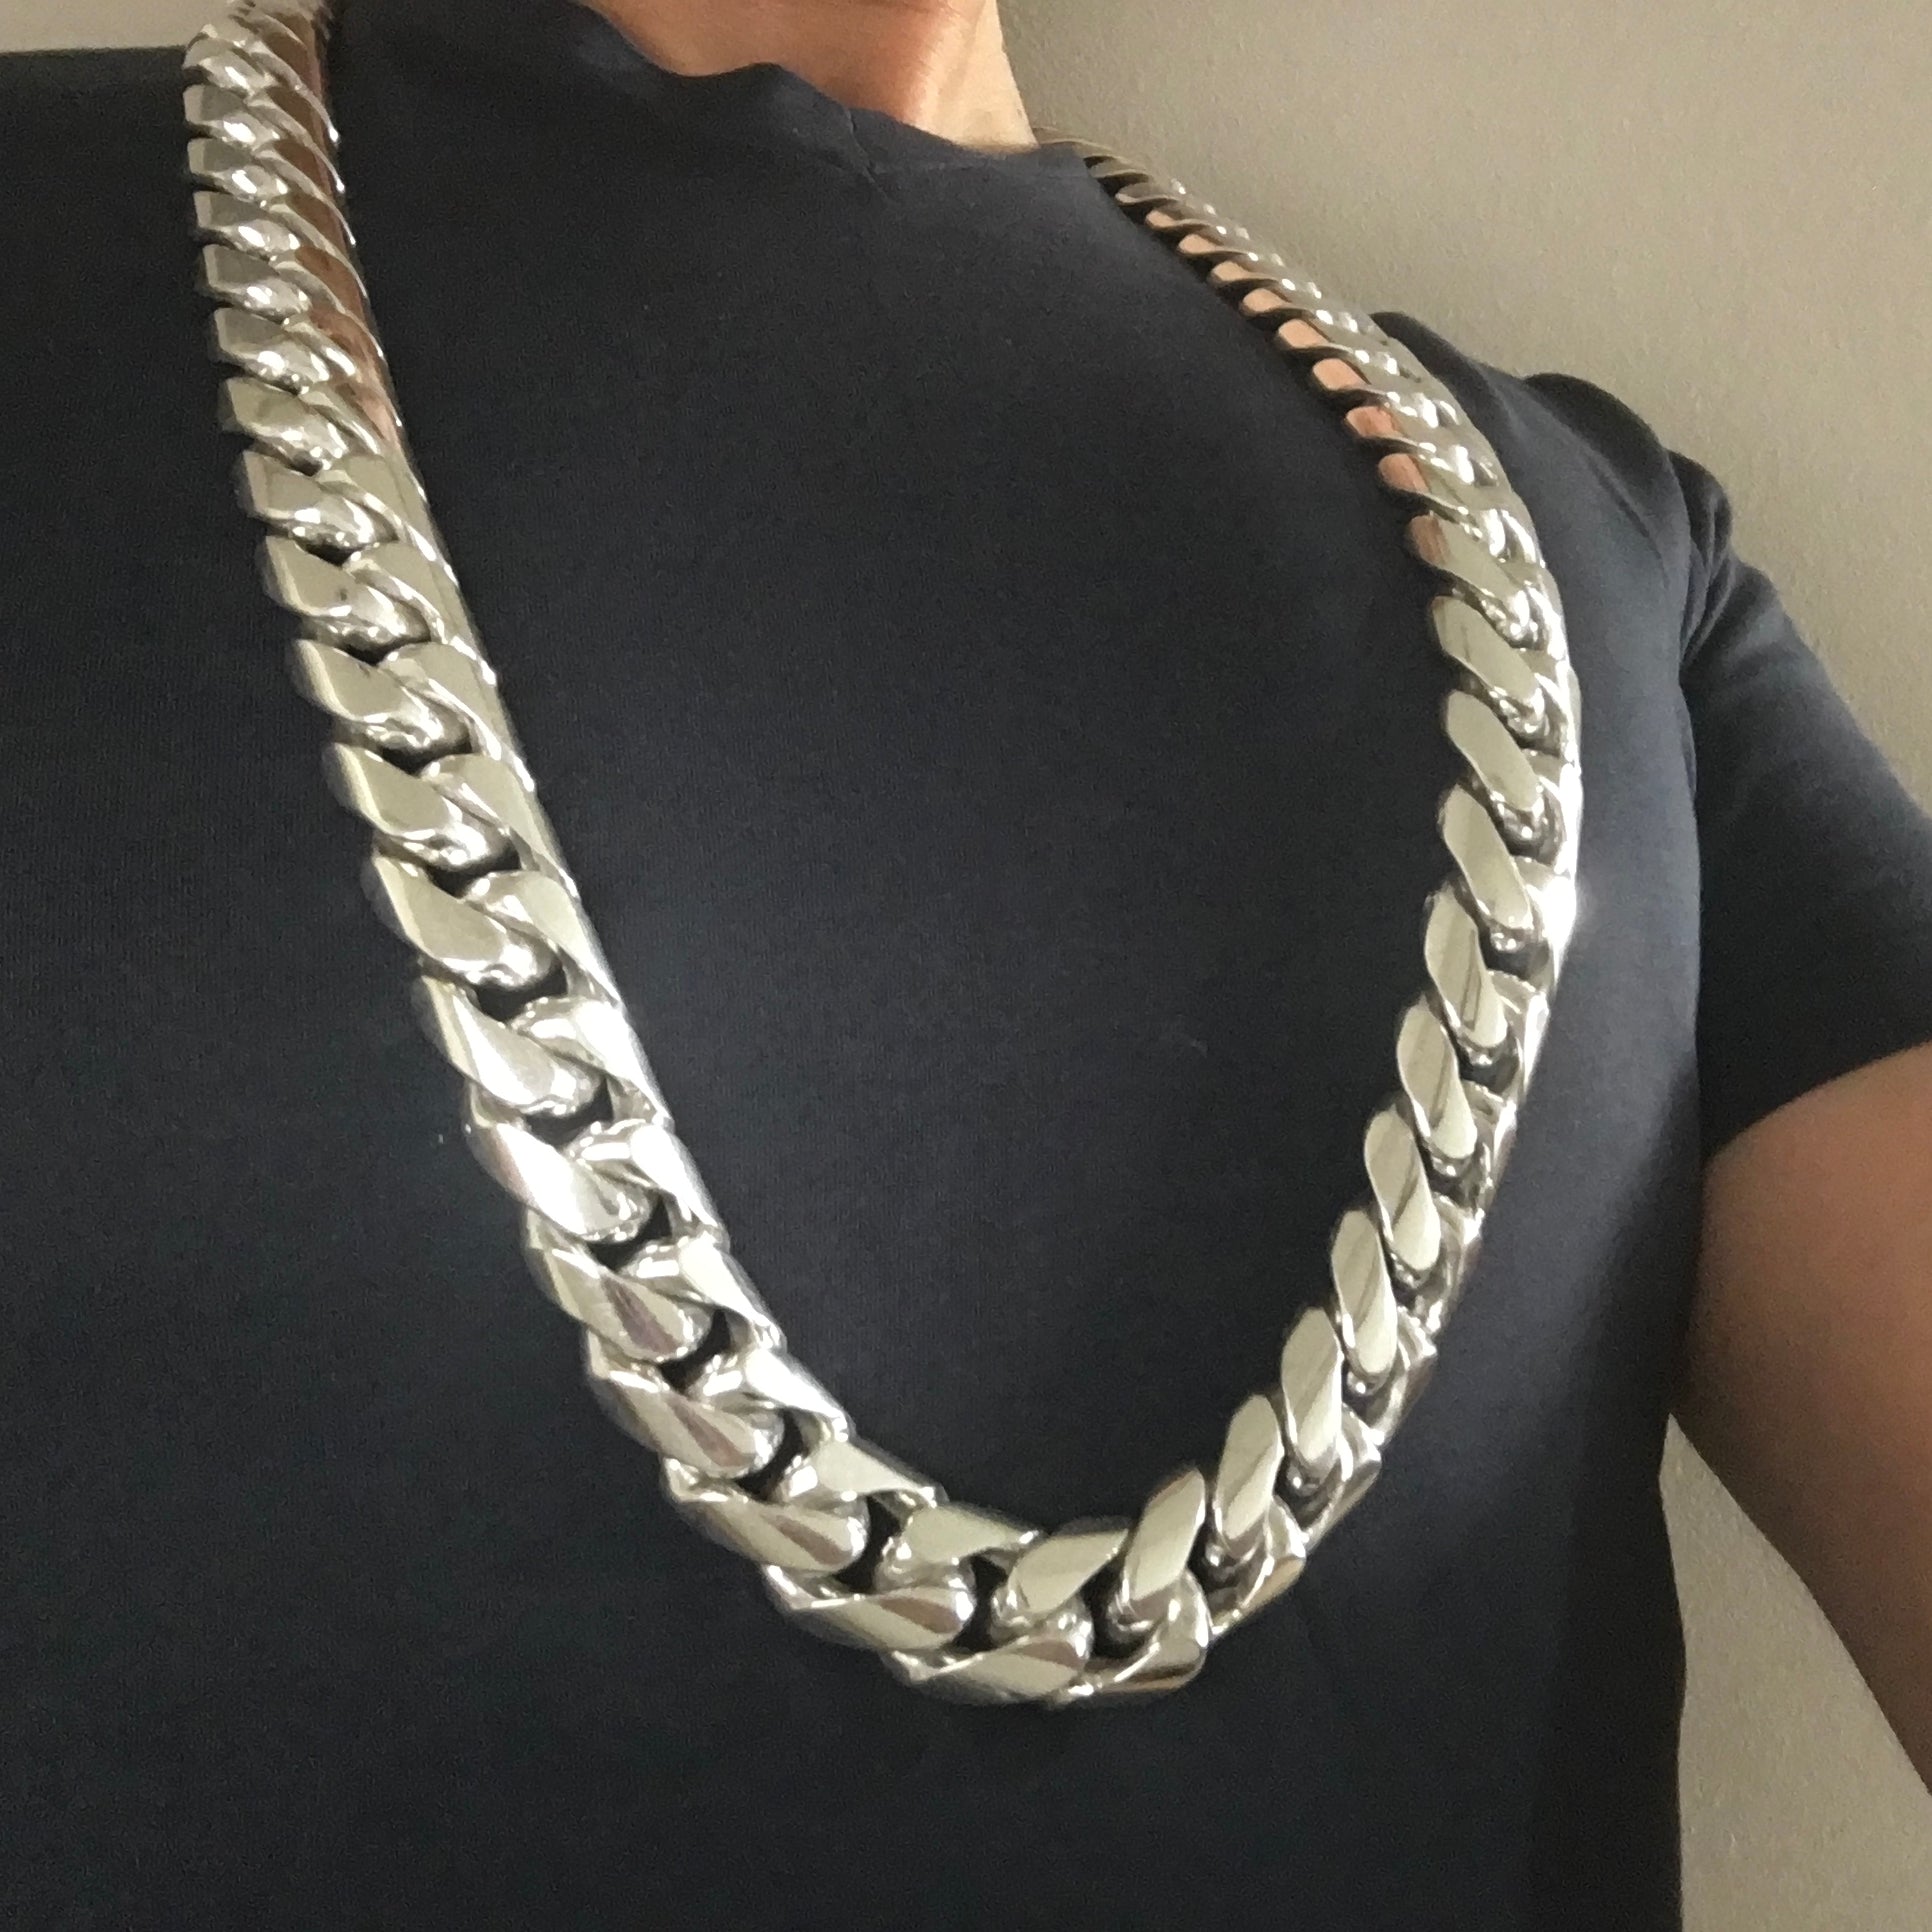 30 Inch Sterling Silver Chain, 76 Cm Long Chain, Finished Chain